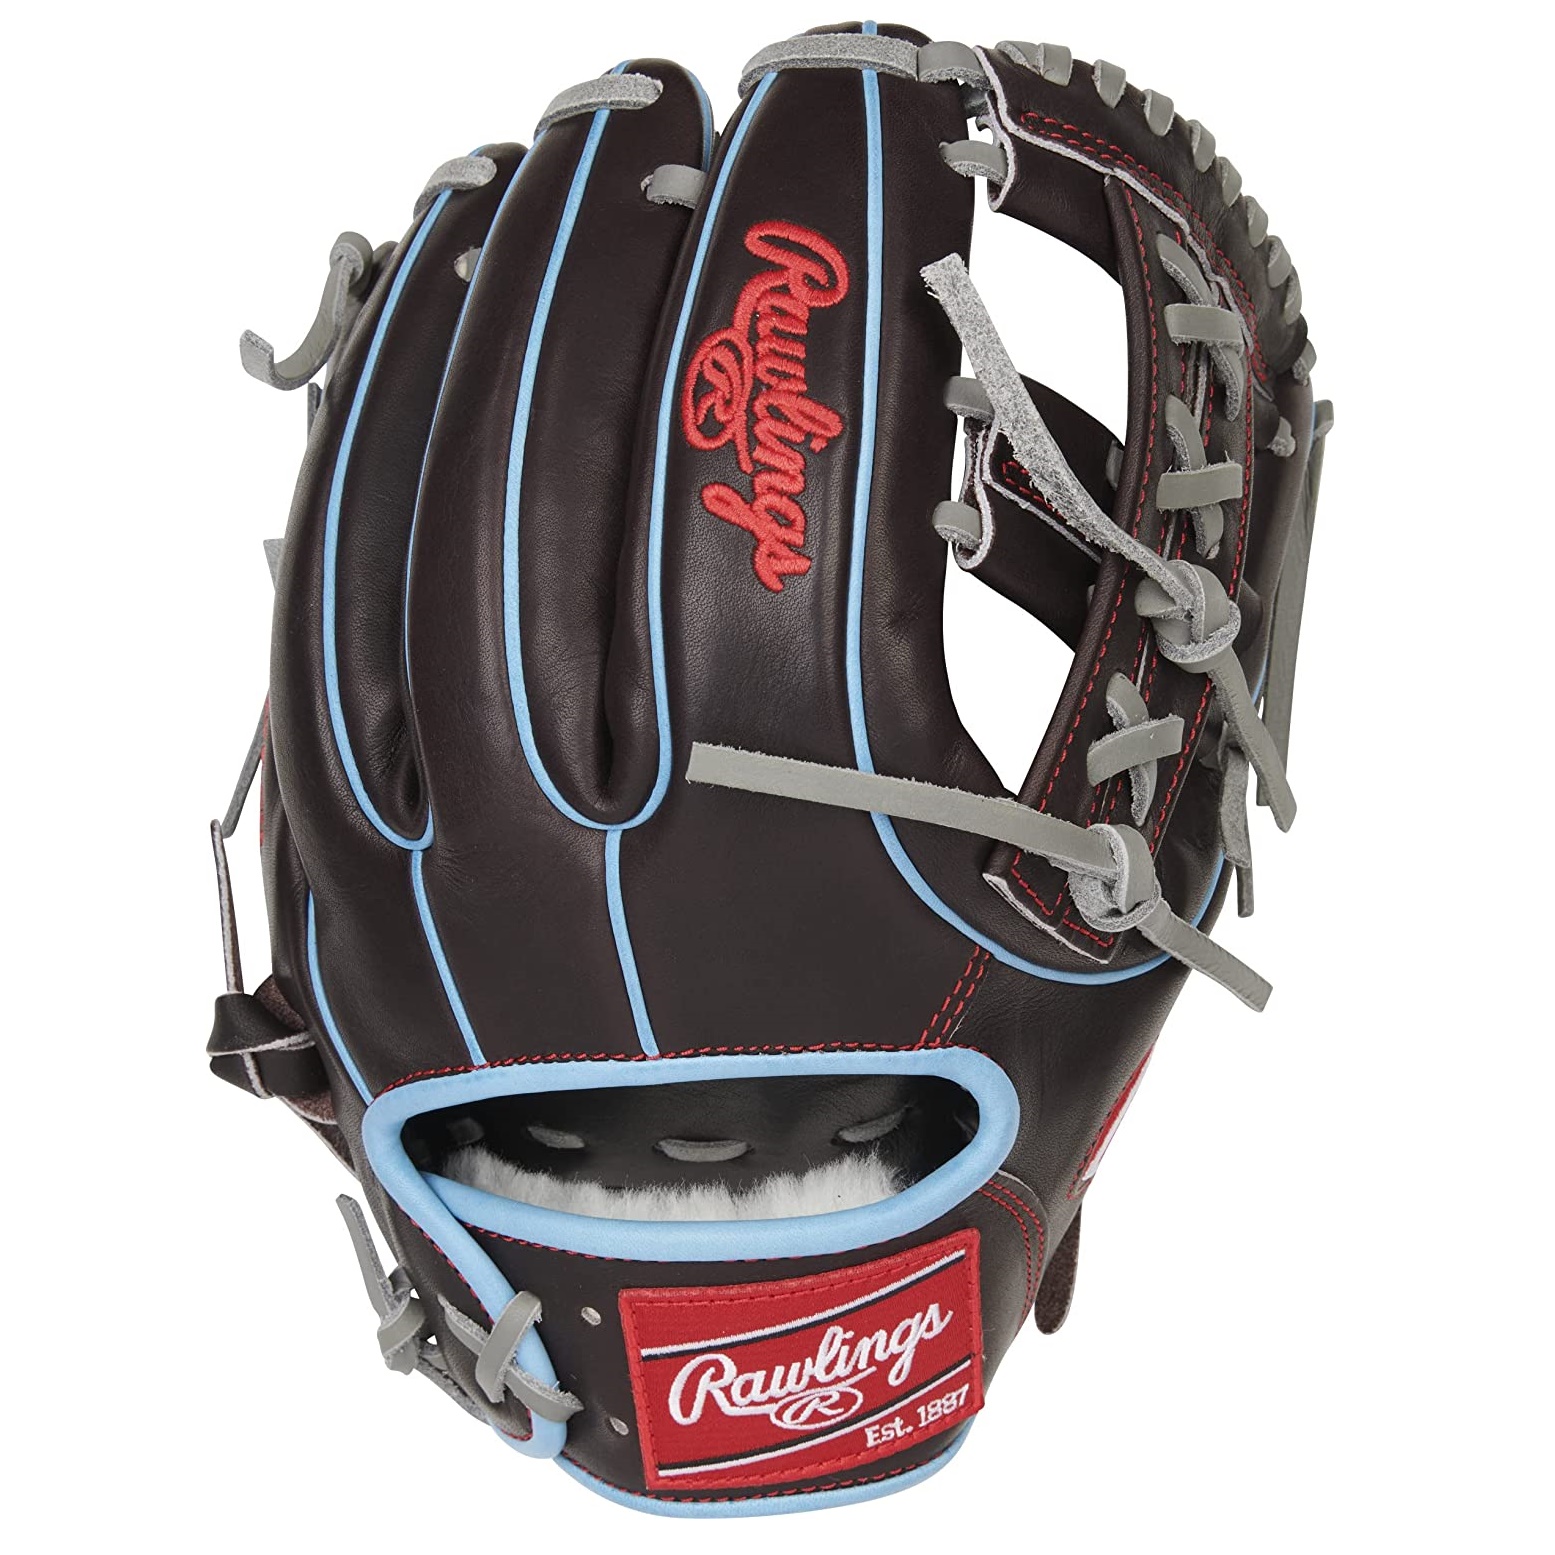 rawlings-pro-preferred-baseball-glove-11-5-single-post-right-hand-throw PROS314-32MO-RightHandThrow Rawlings  The Pro Preferred line of baseball gloves from Rawlings are known